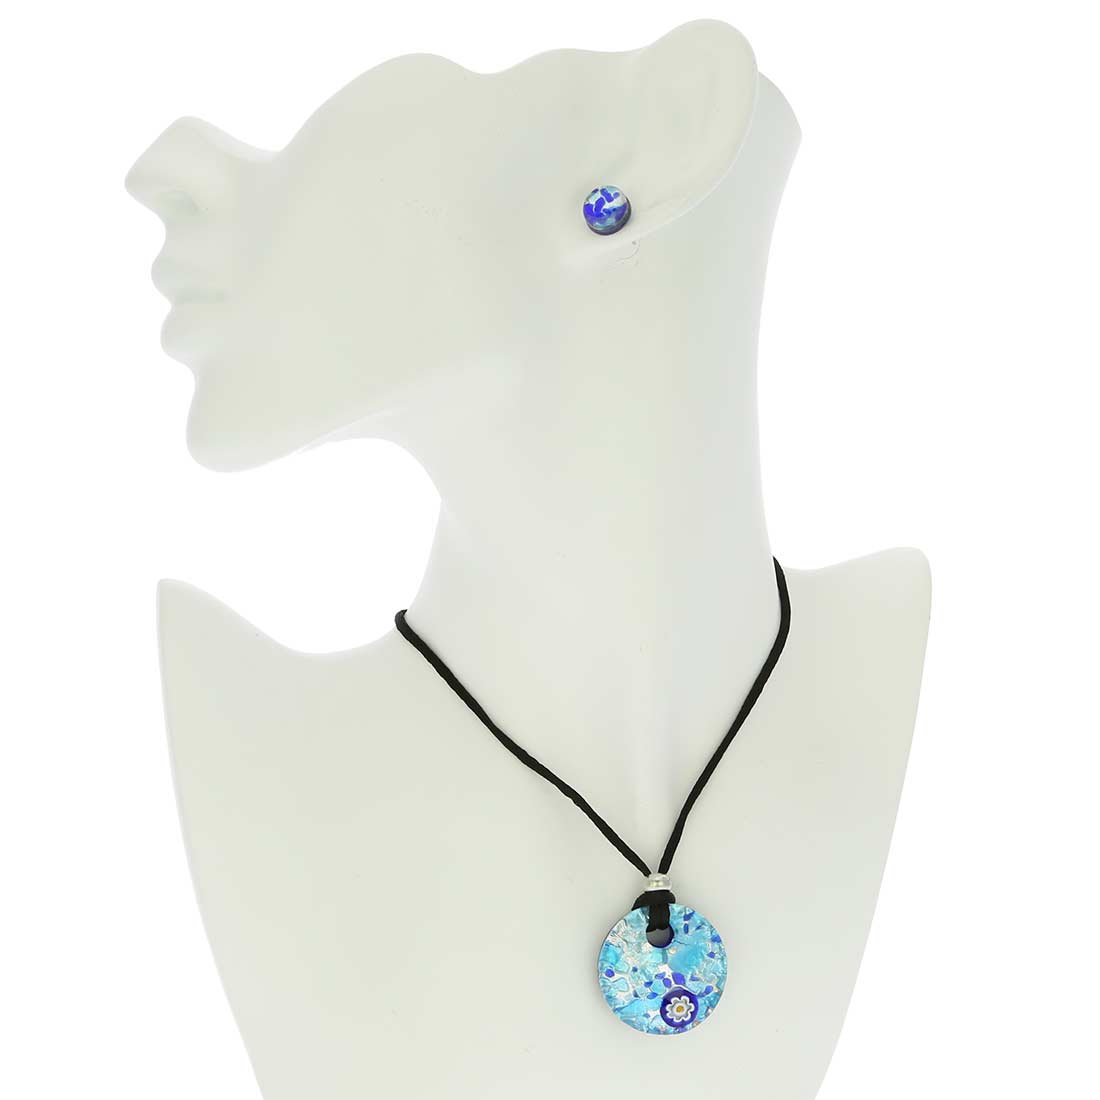 Venetian Reflections Round Necklace and Earrings Set - Aqua Blue